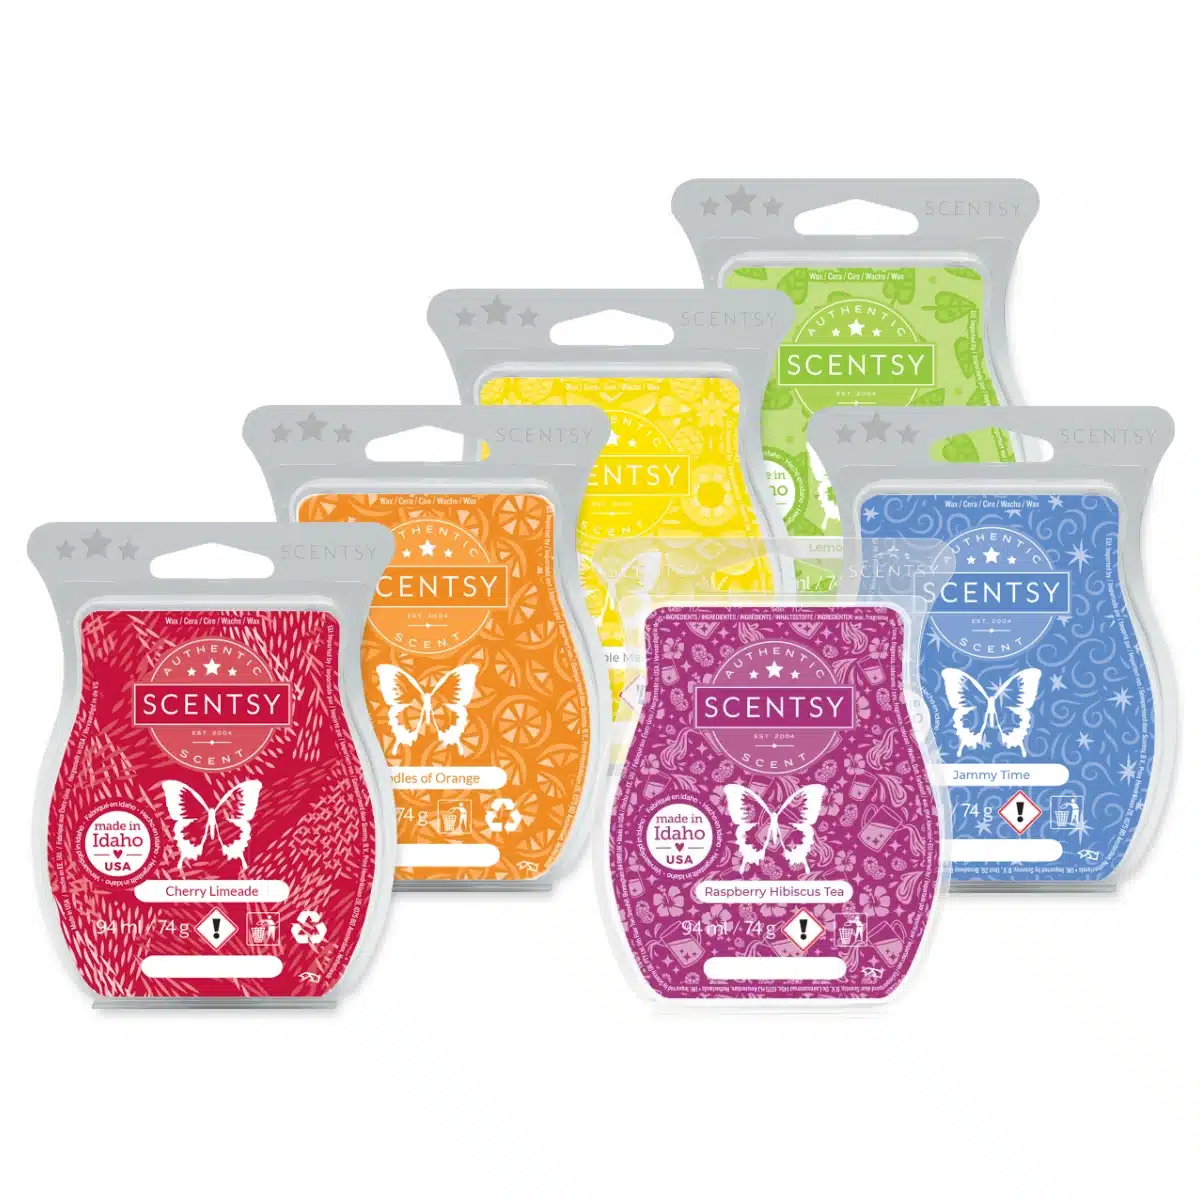 Scentsy 6 Bar Multipack, Buy 6 For The Price Of 5 - The Candle